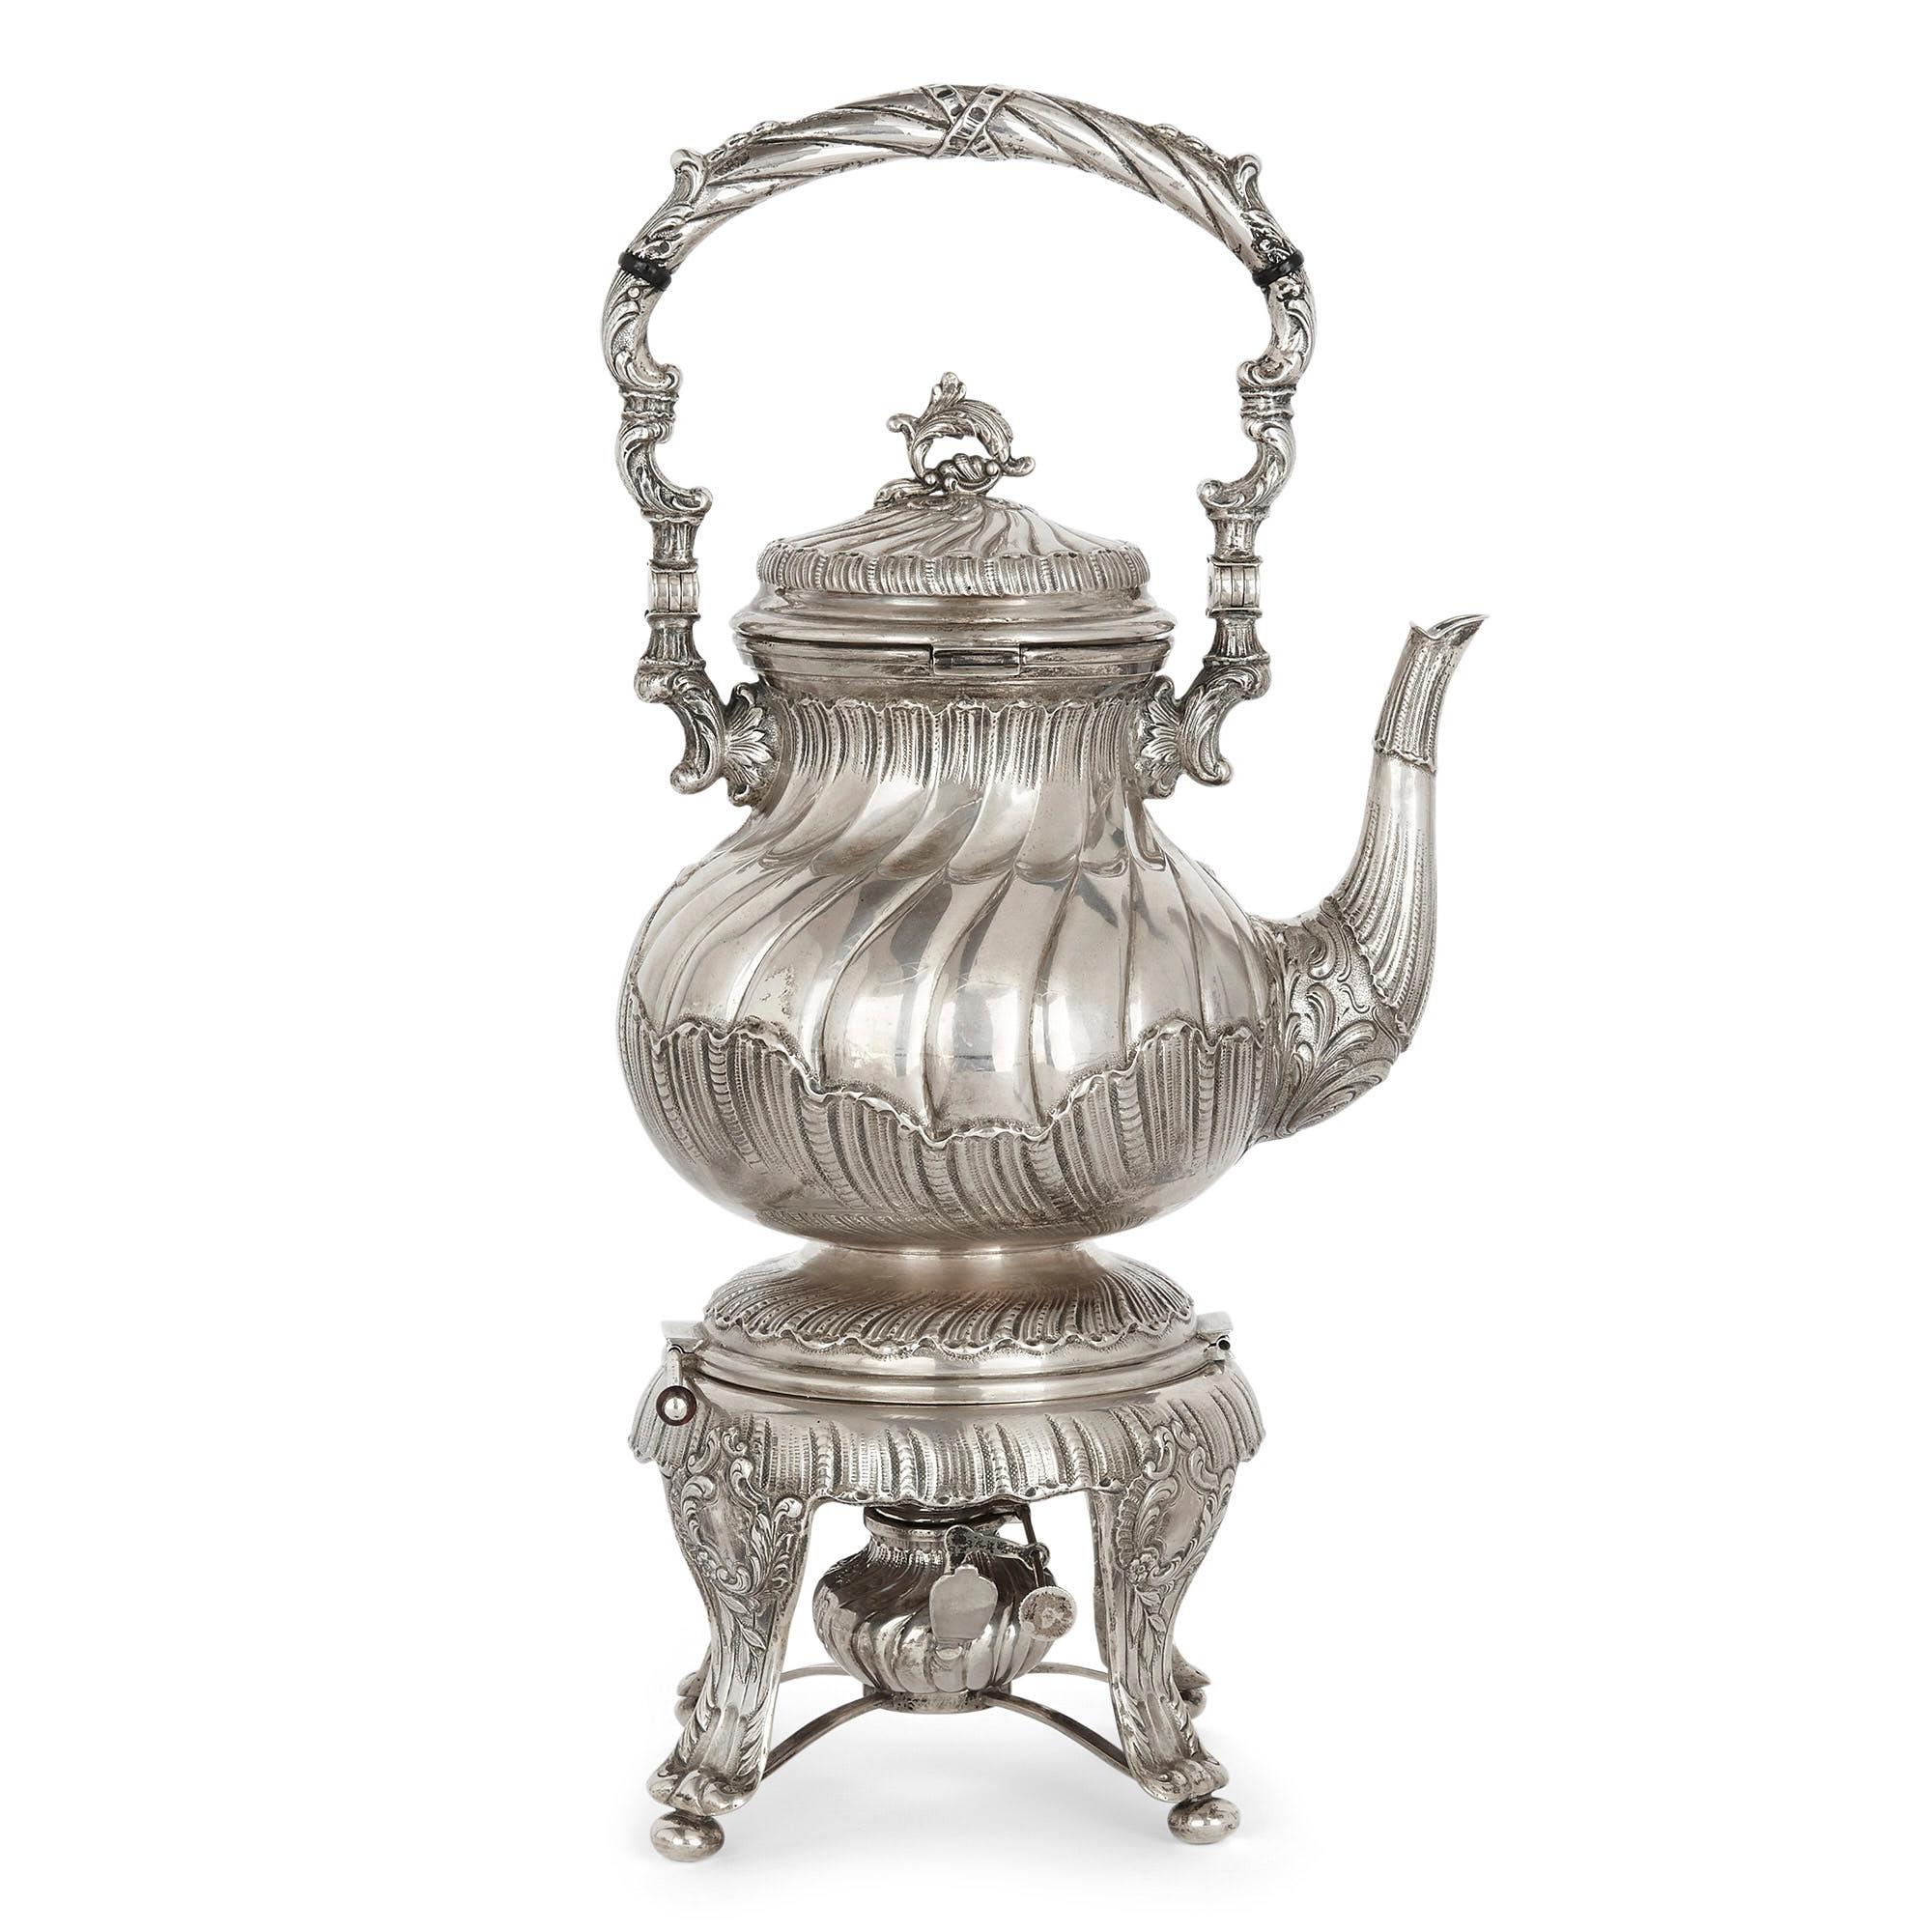 20th century Spanish silver Rococo style tea and coffee service,
Spanish, 20th century
Kettle on stand: Height 44cm, width 23cm, depth 16cm
Milk jug: Height 12cm, width 13cm, depth 9cm

Comprising of a solid silver tray, teapot, coffee pot,